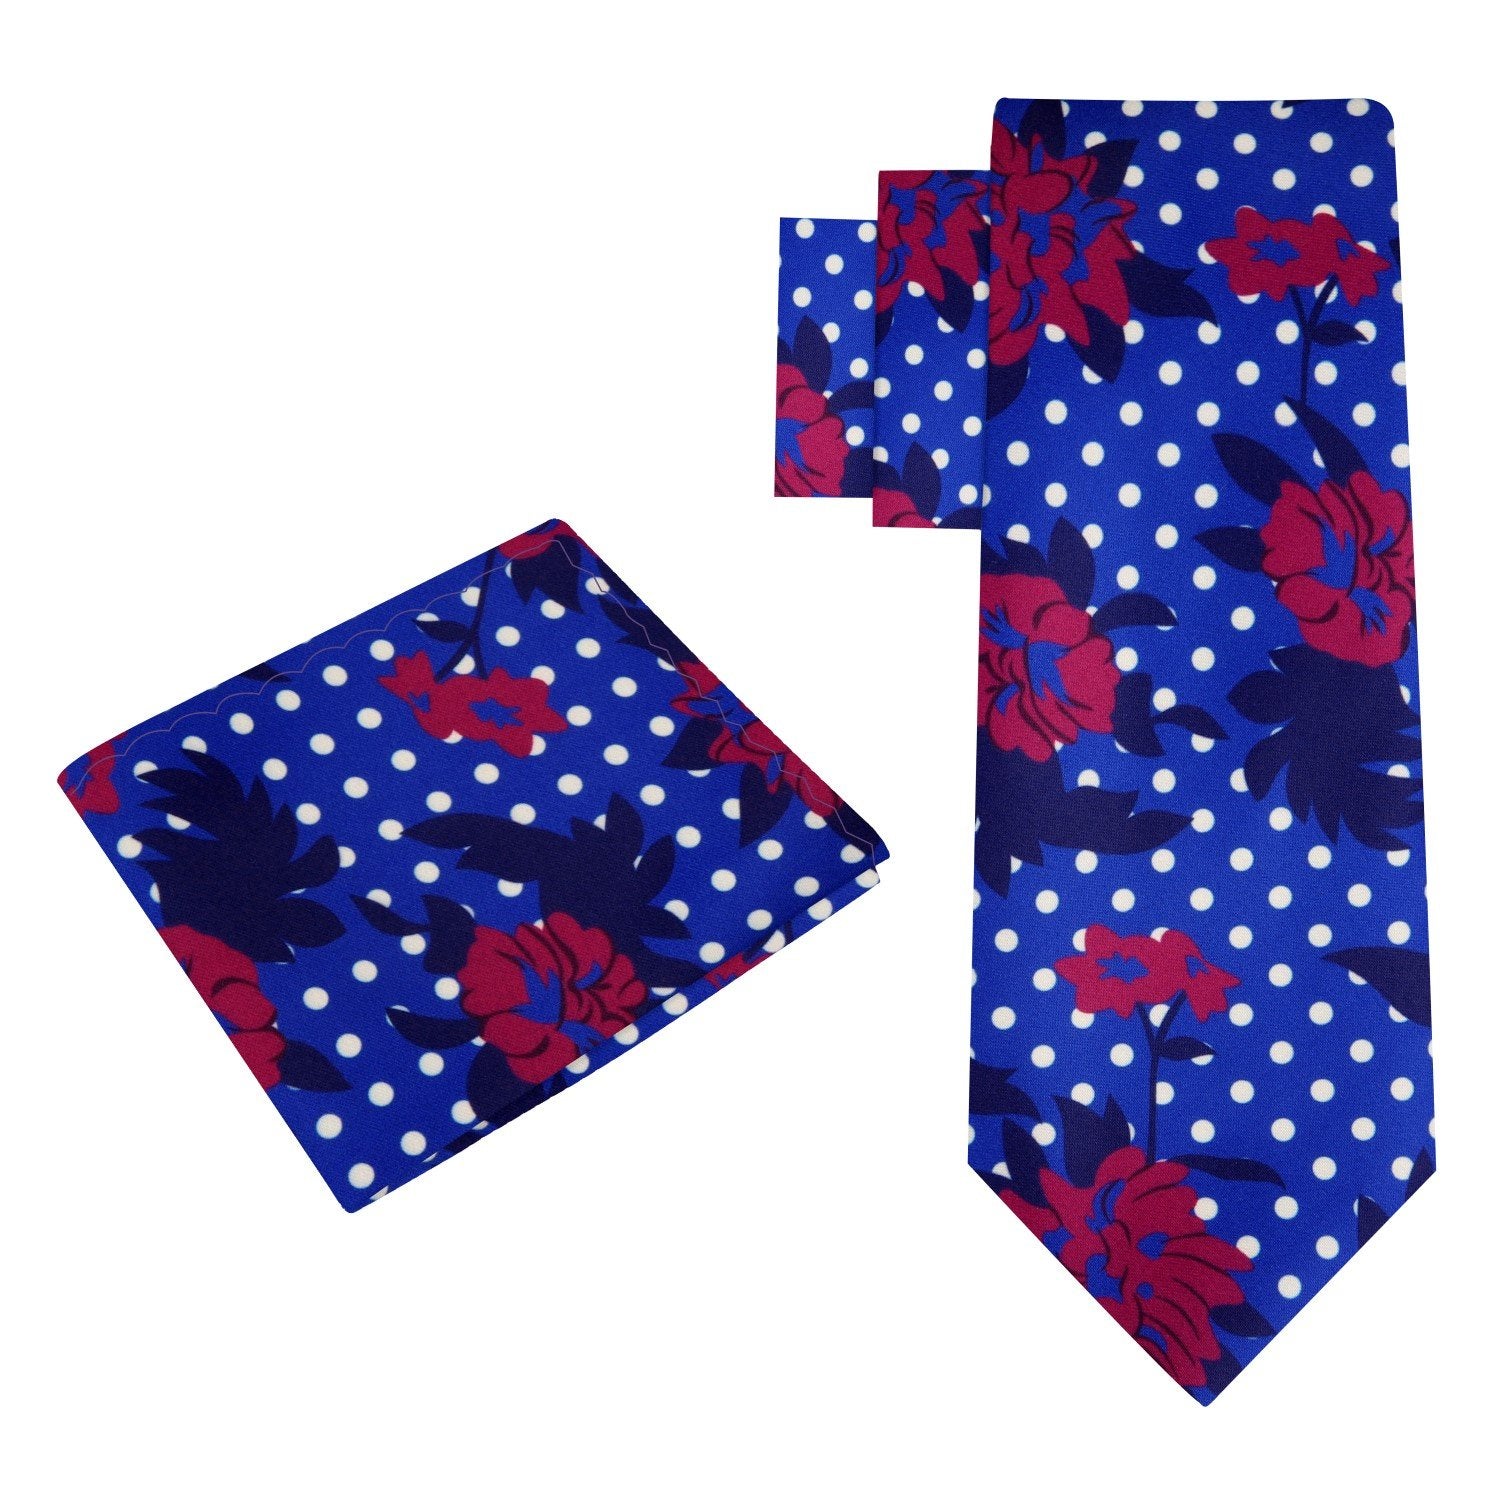 Alt View: A Blue, White, Red Color Abstract Polka and Floral Pattern Silk Tie, Pocket Square